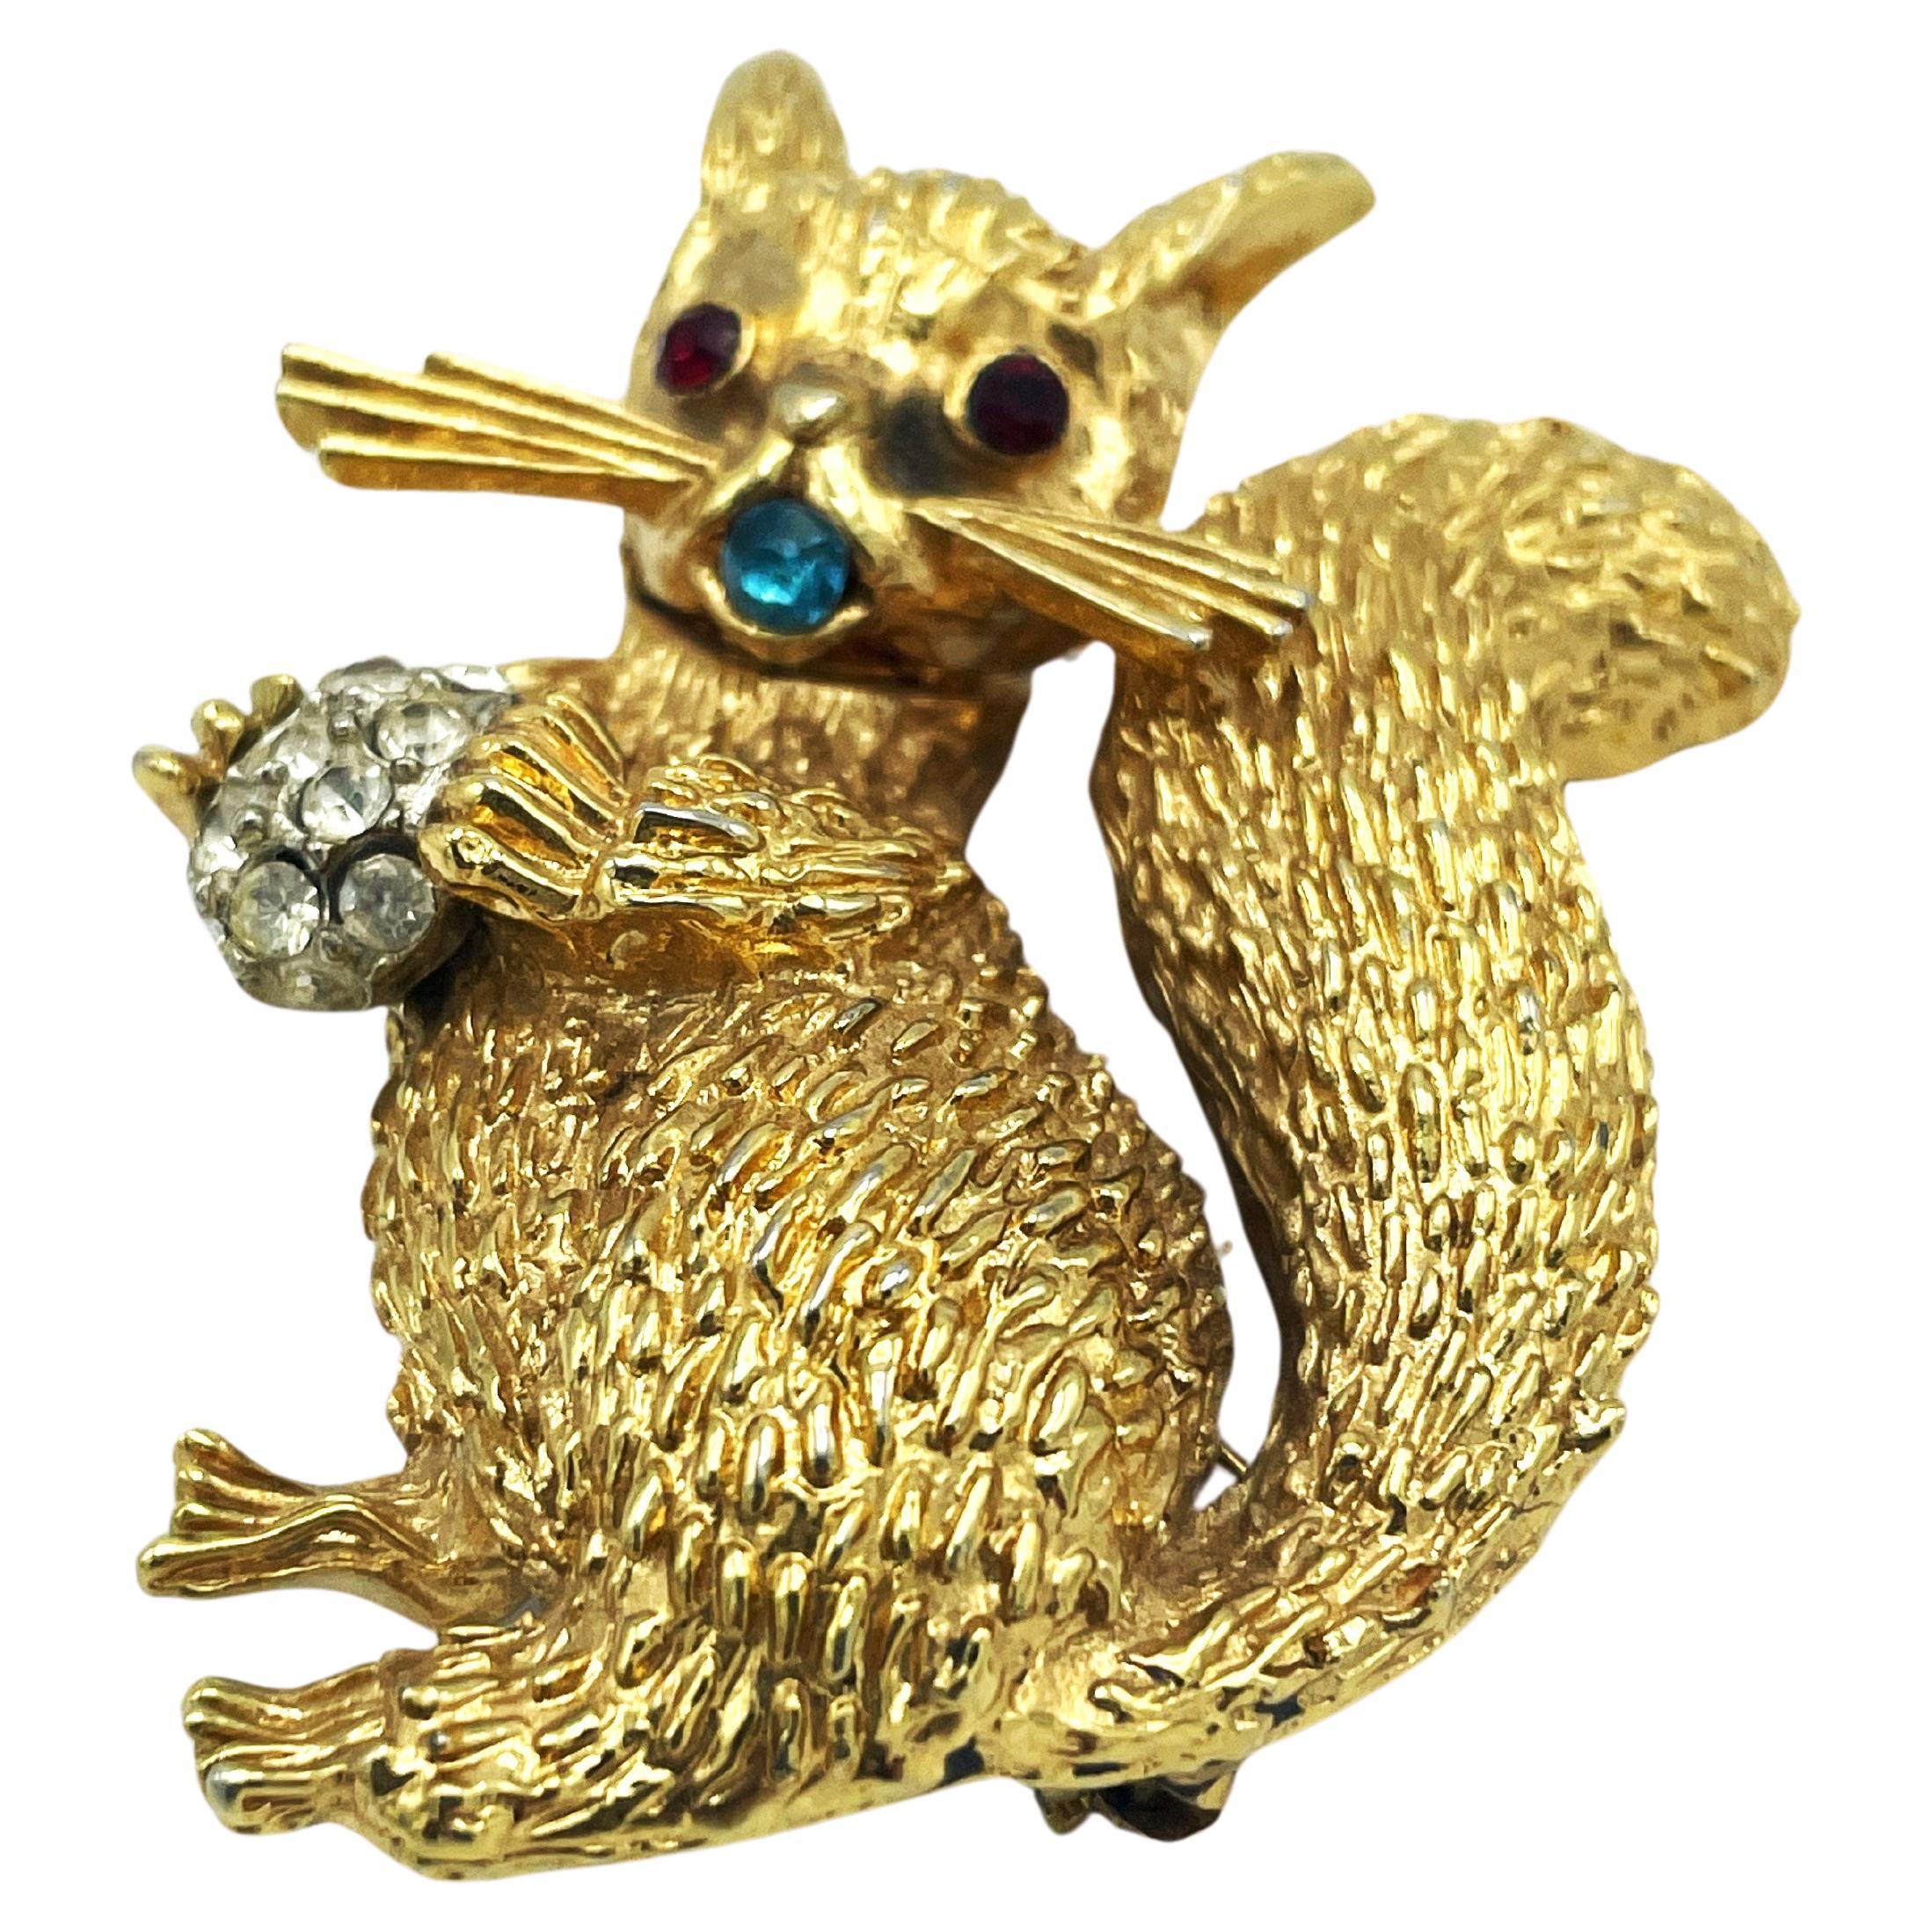 Brooch in the shape of a squirrel with rhinestone nut, signed ART USA 1950s